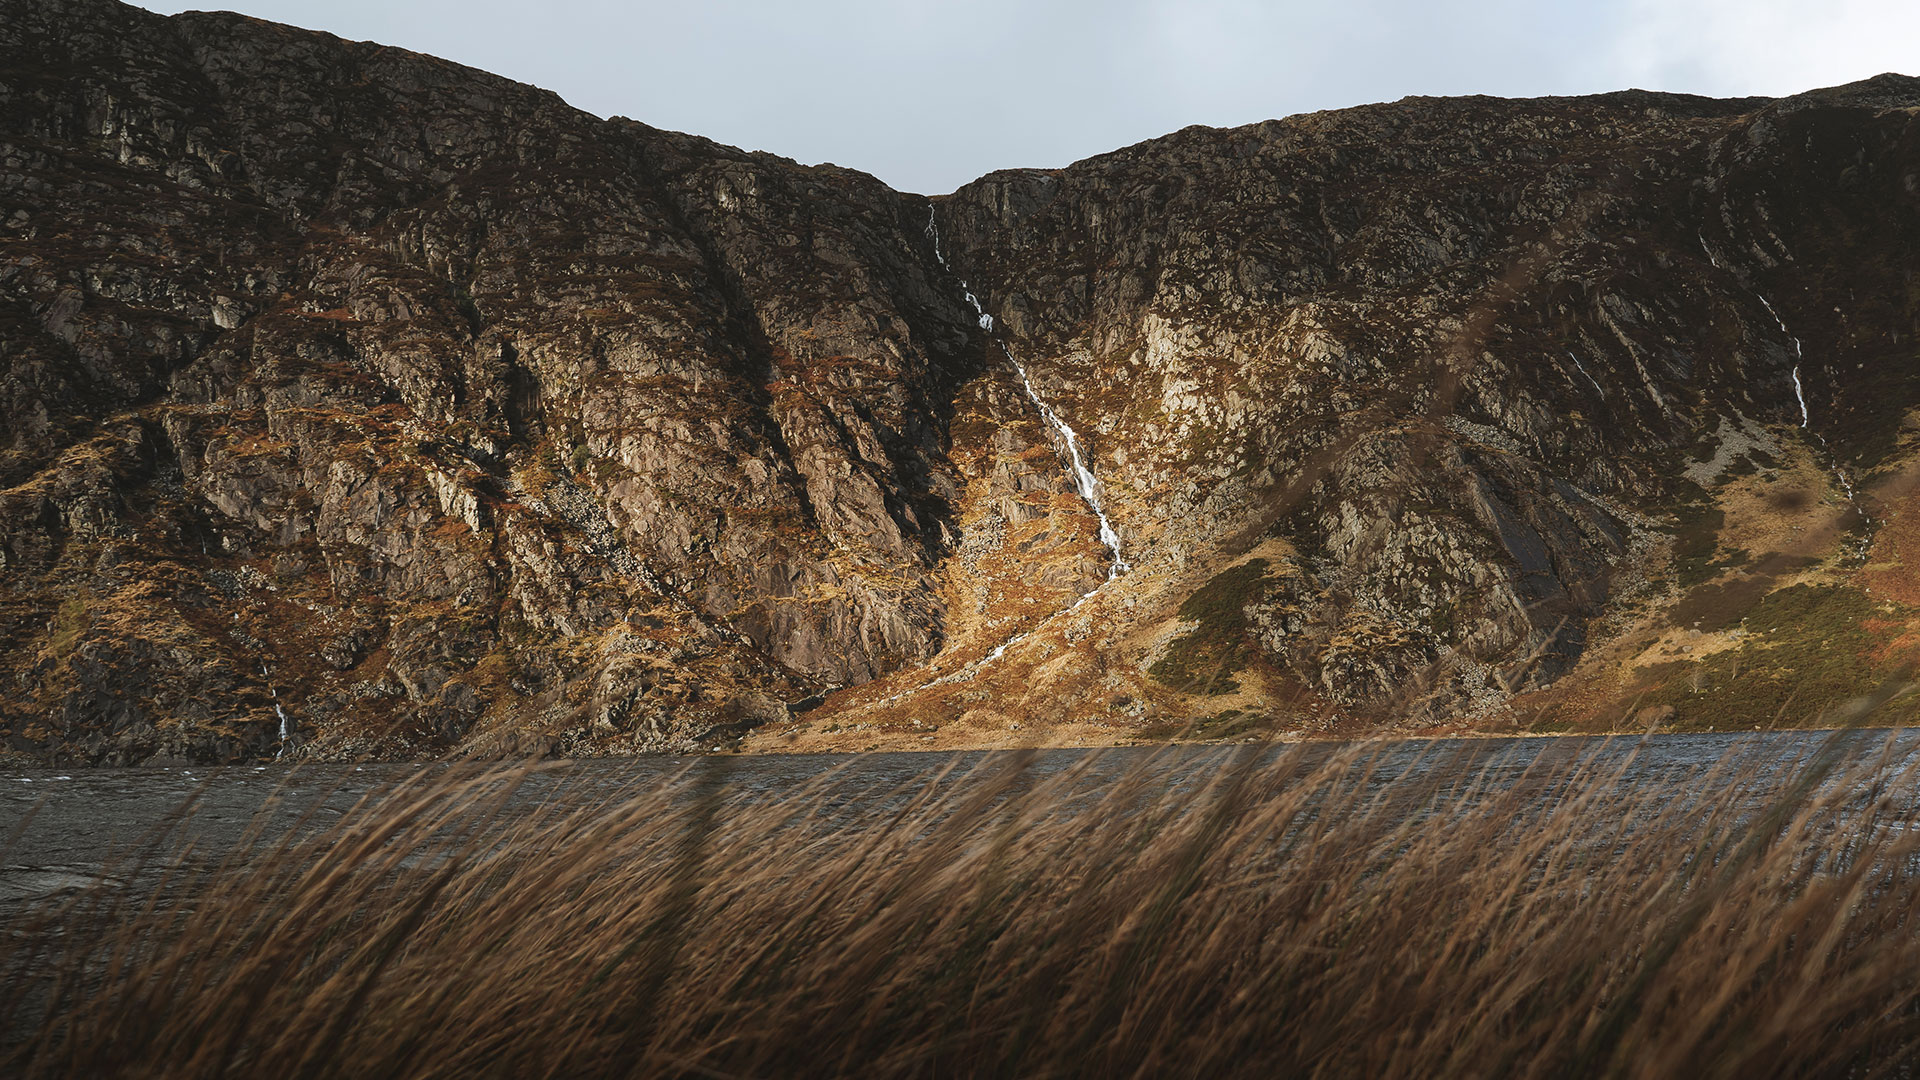 Cliff faces within the Carneddau